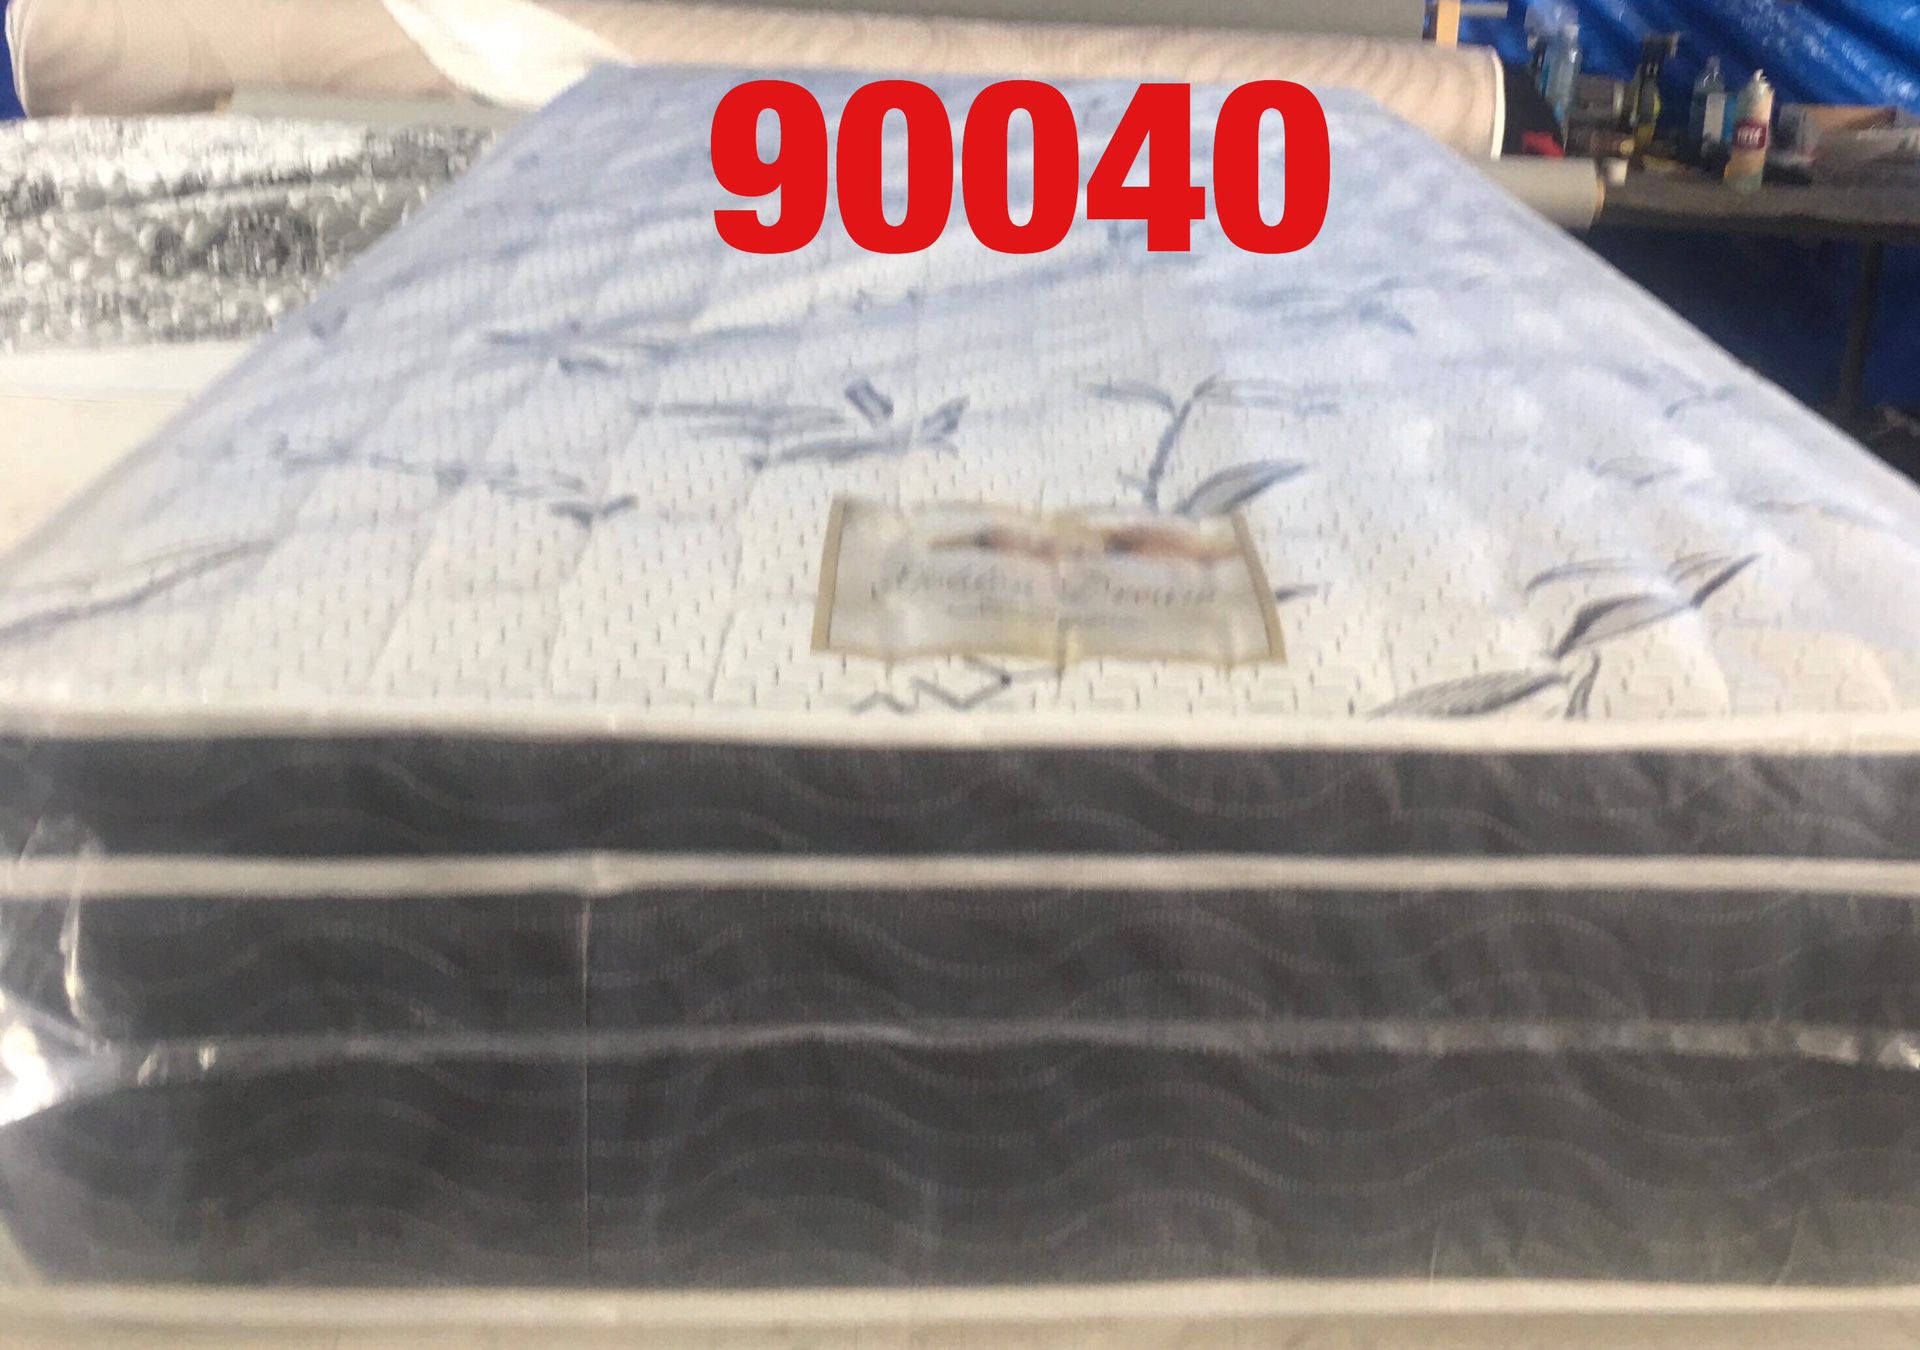 12” Thick 1 sided pillow top mattress starting at $135. 12” Thick 1 sided pillow top mattress. Not rebuilds. Price includes tax and local delivery